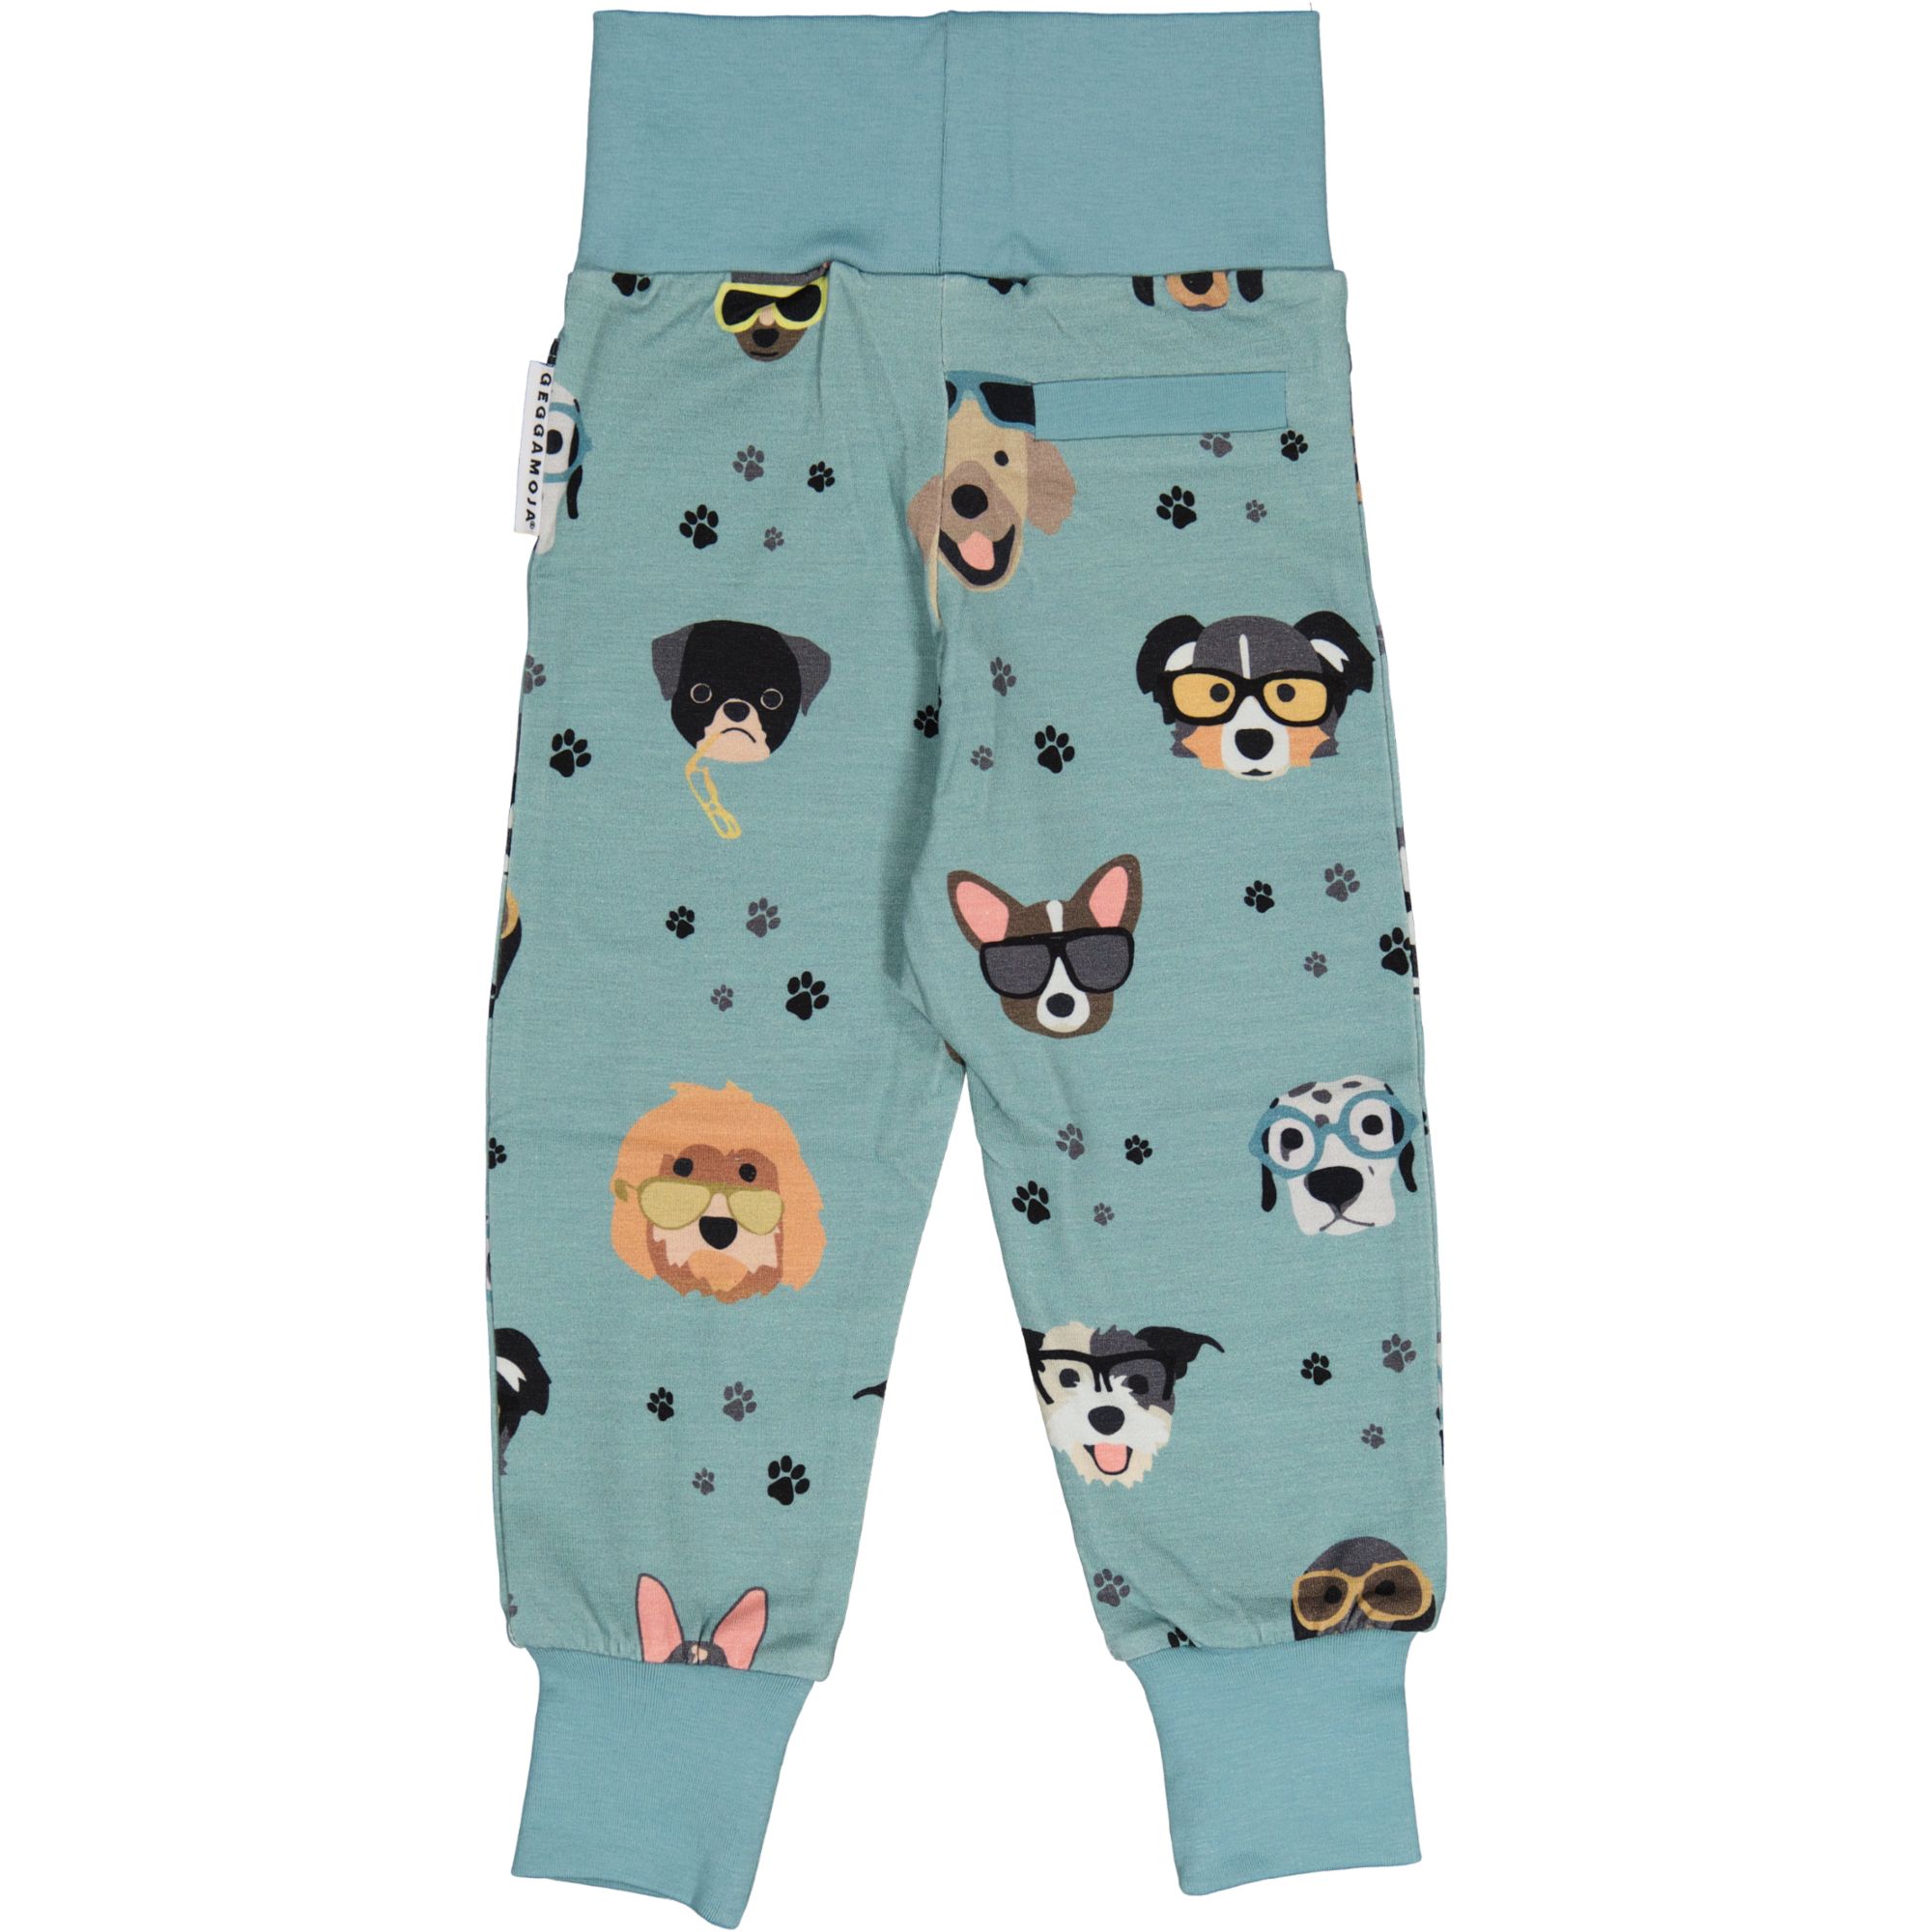 Bamboo baby pants Doggy cool